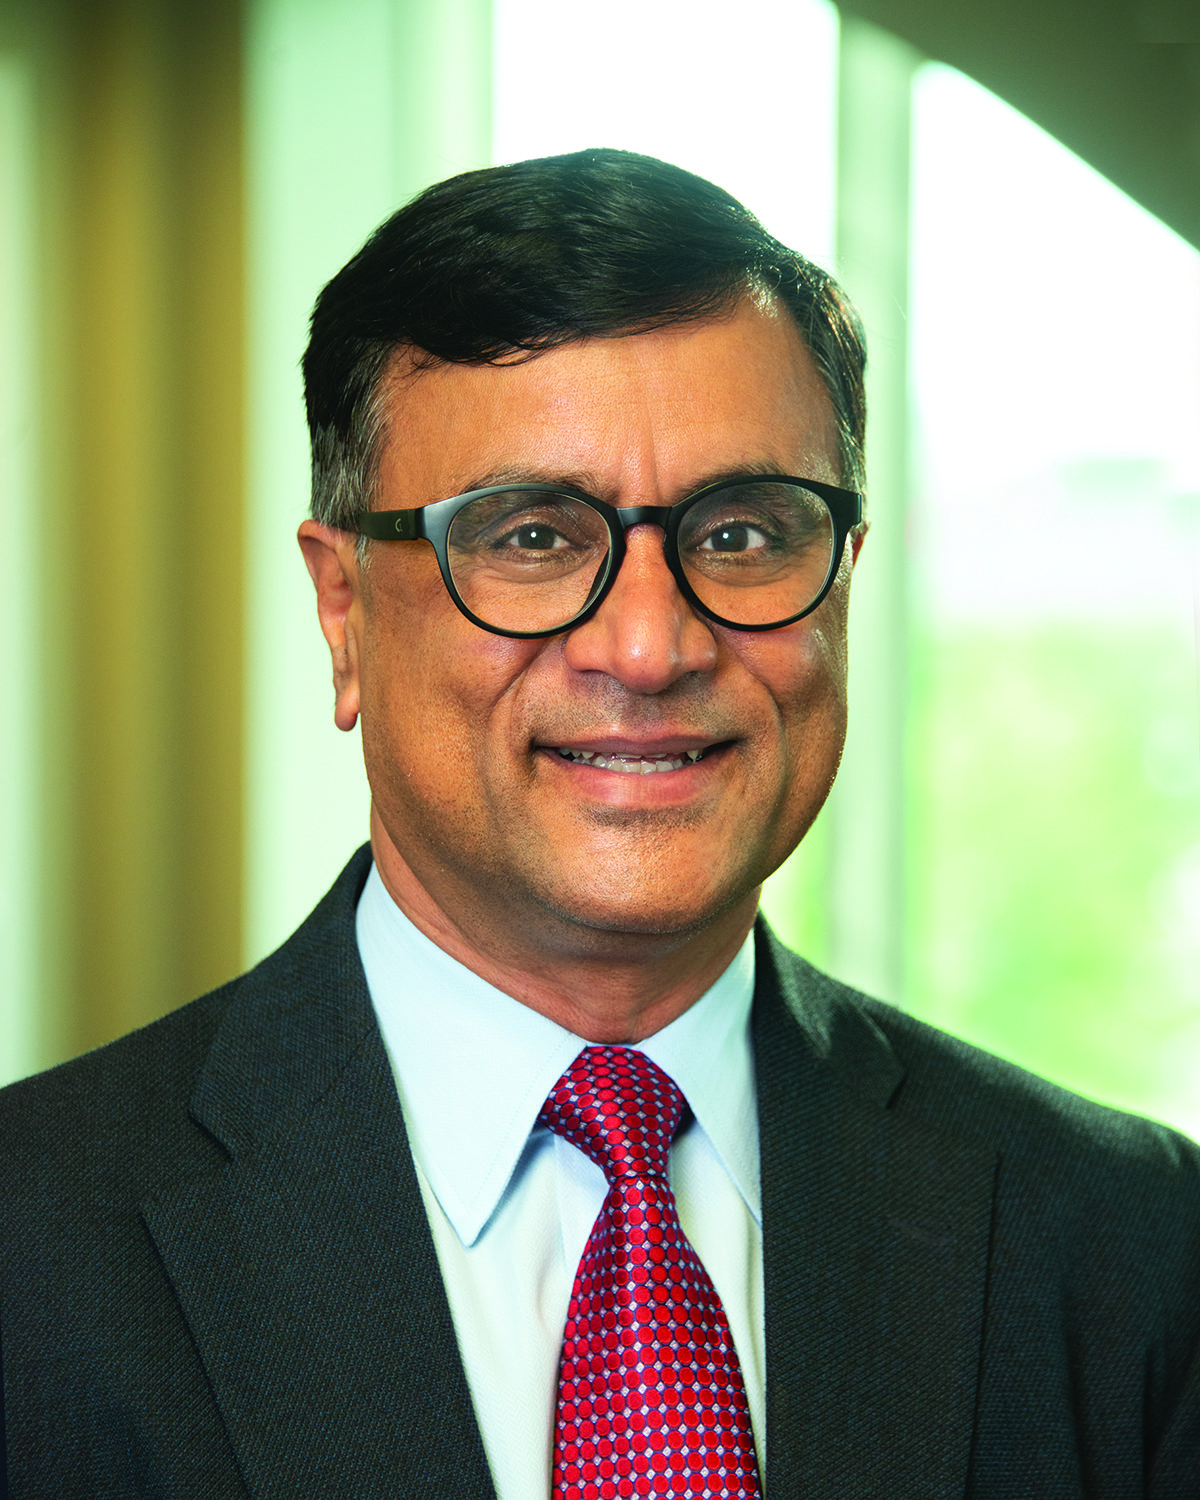 Vipin Khetarpal, MD - An Independent Provider of Memorial Healthcare